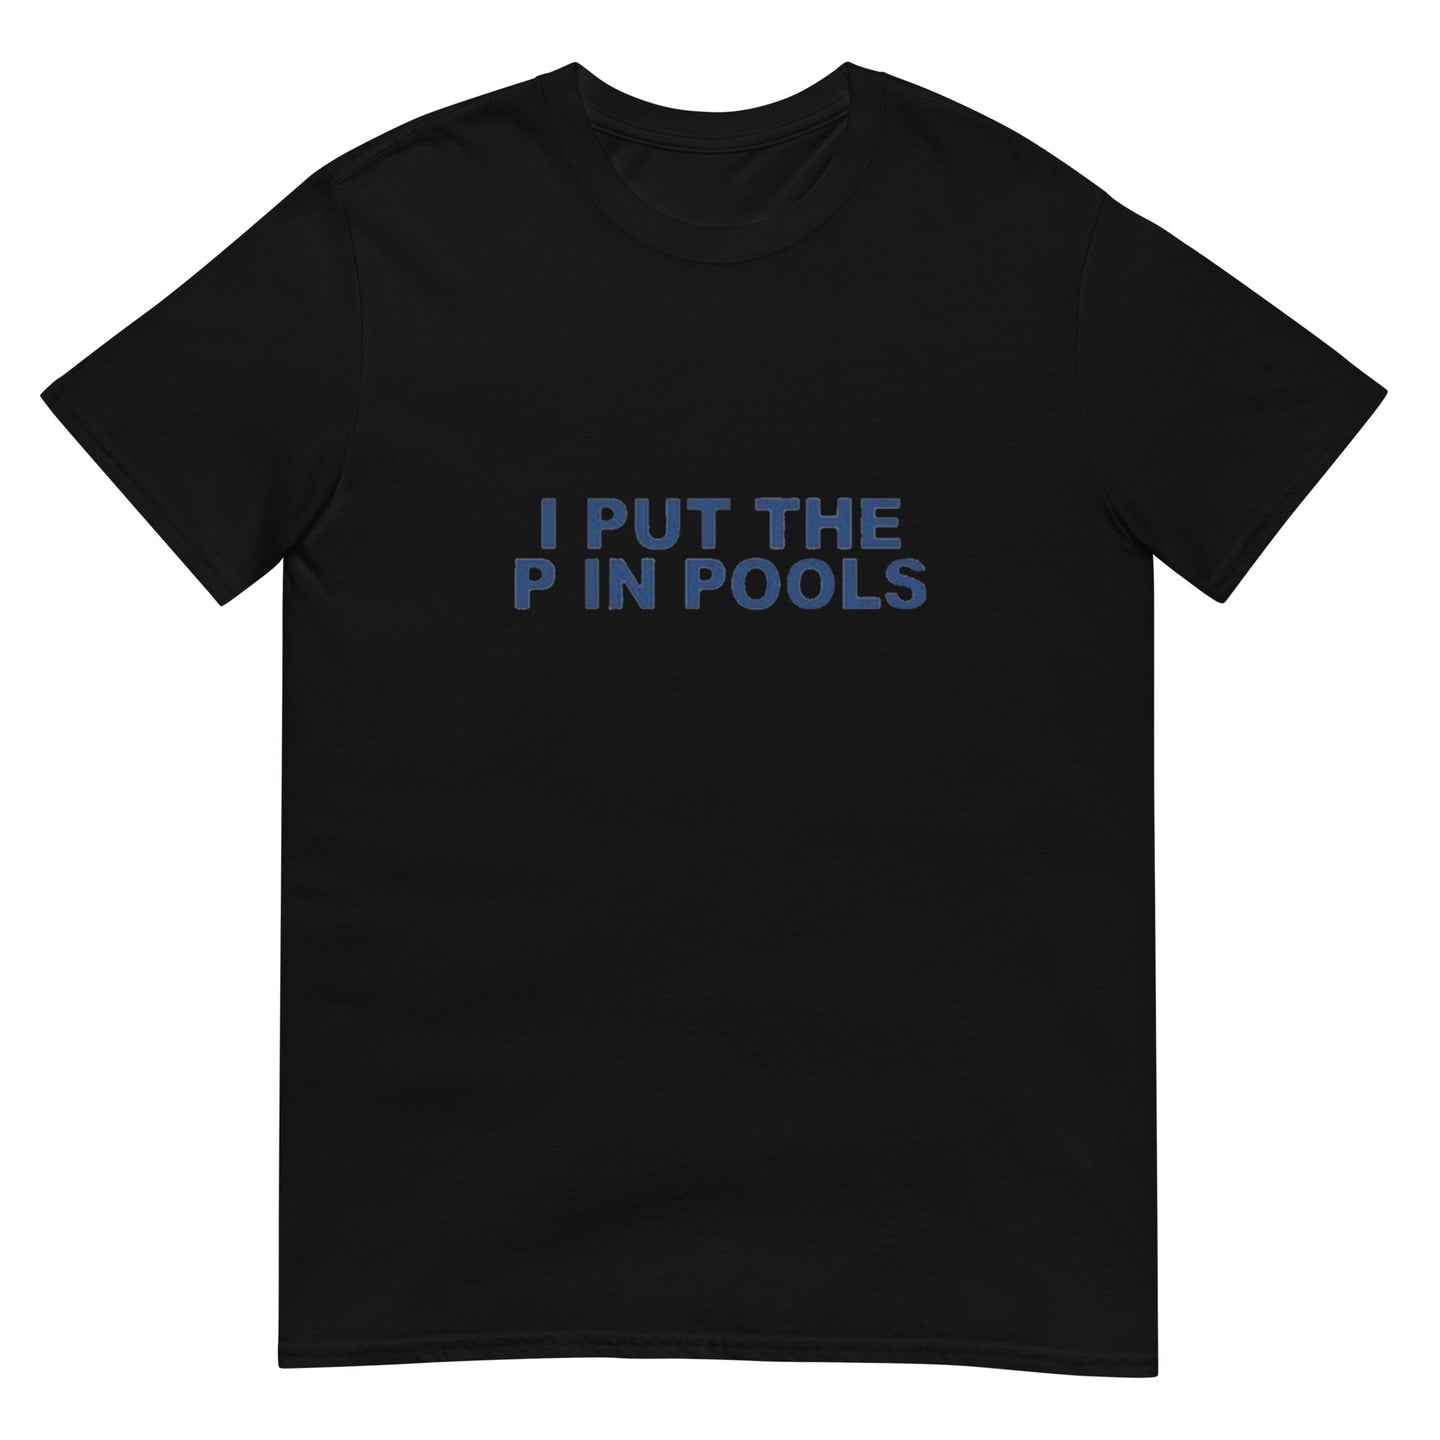 P in Pools Short-Sleeve Unisex T-Shirt